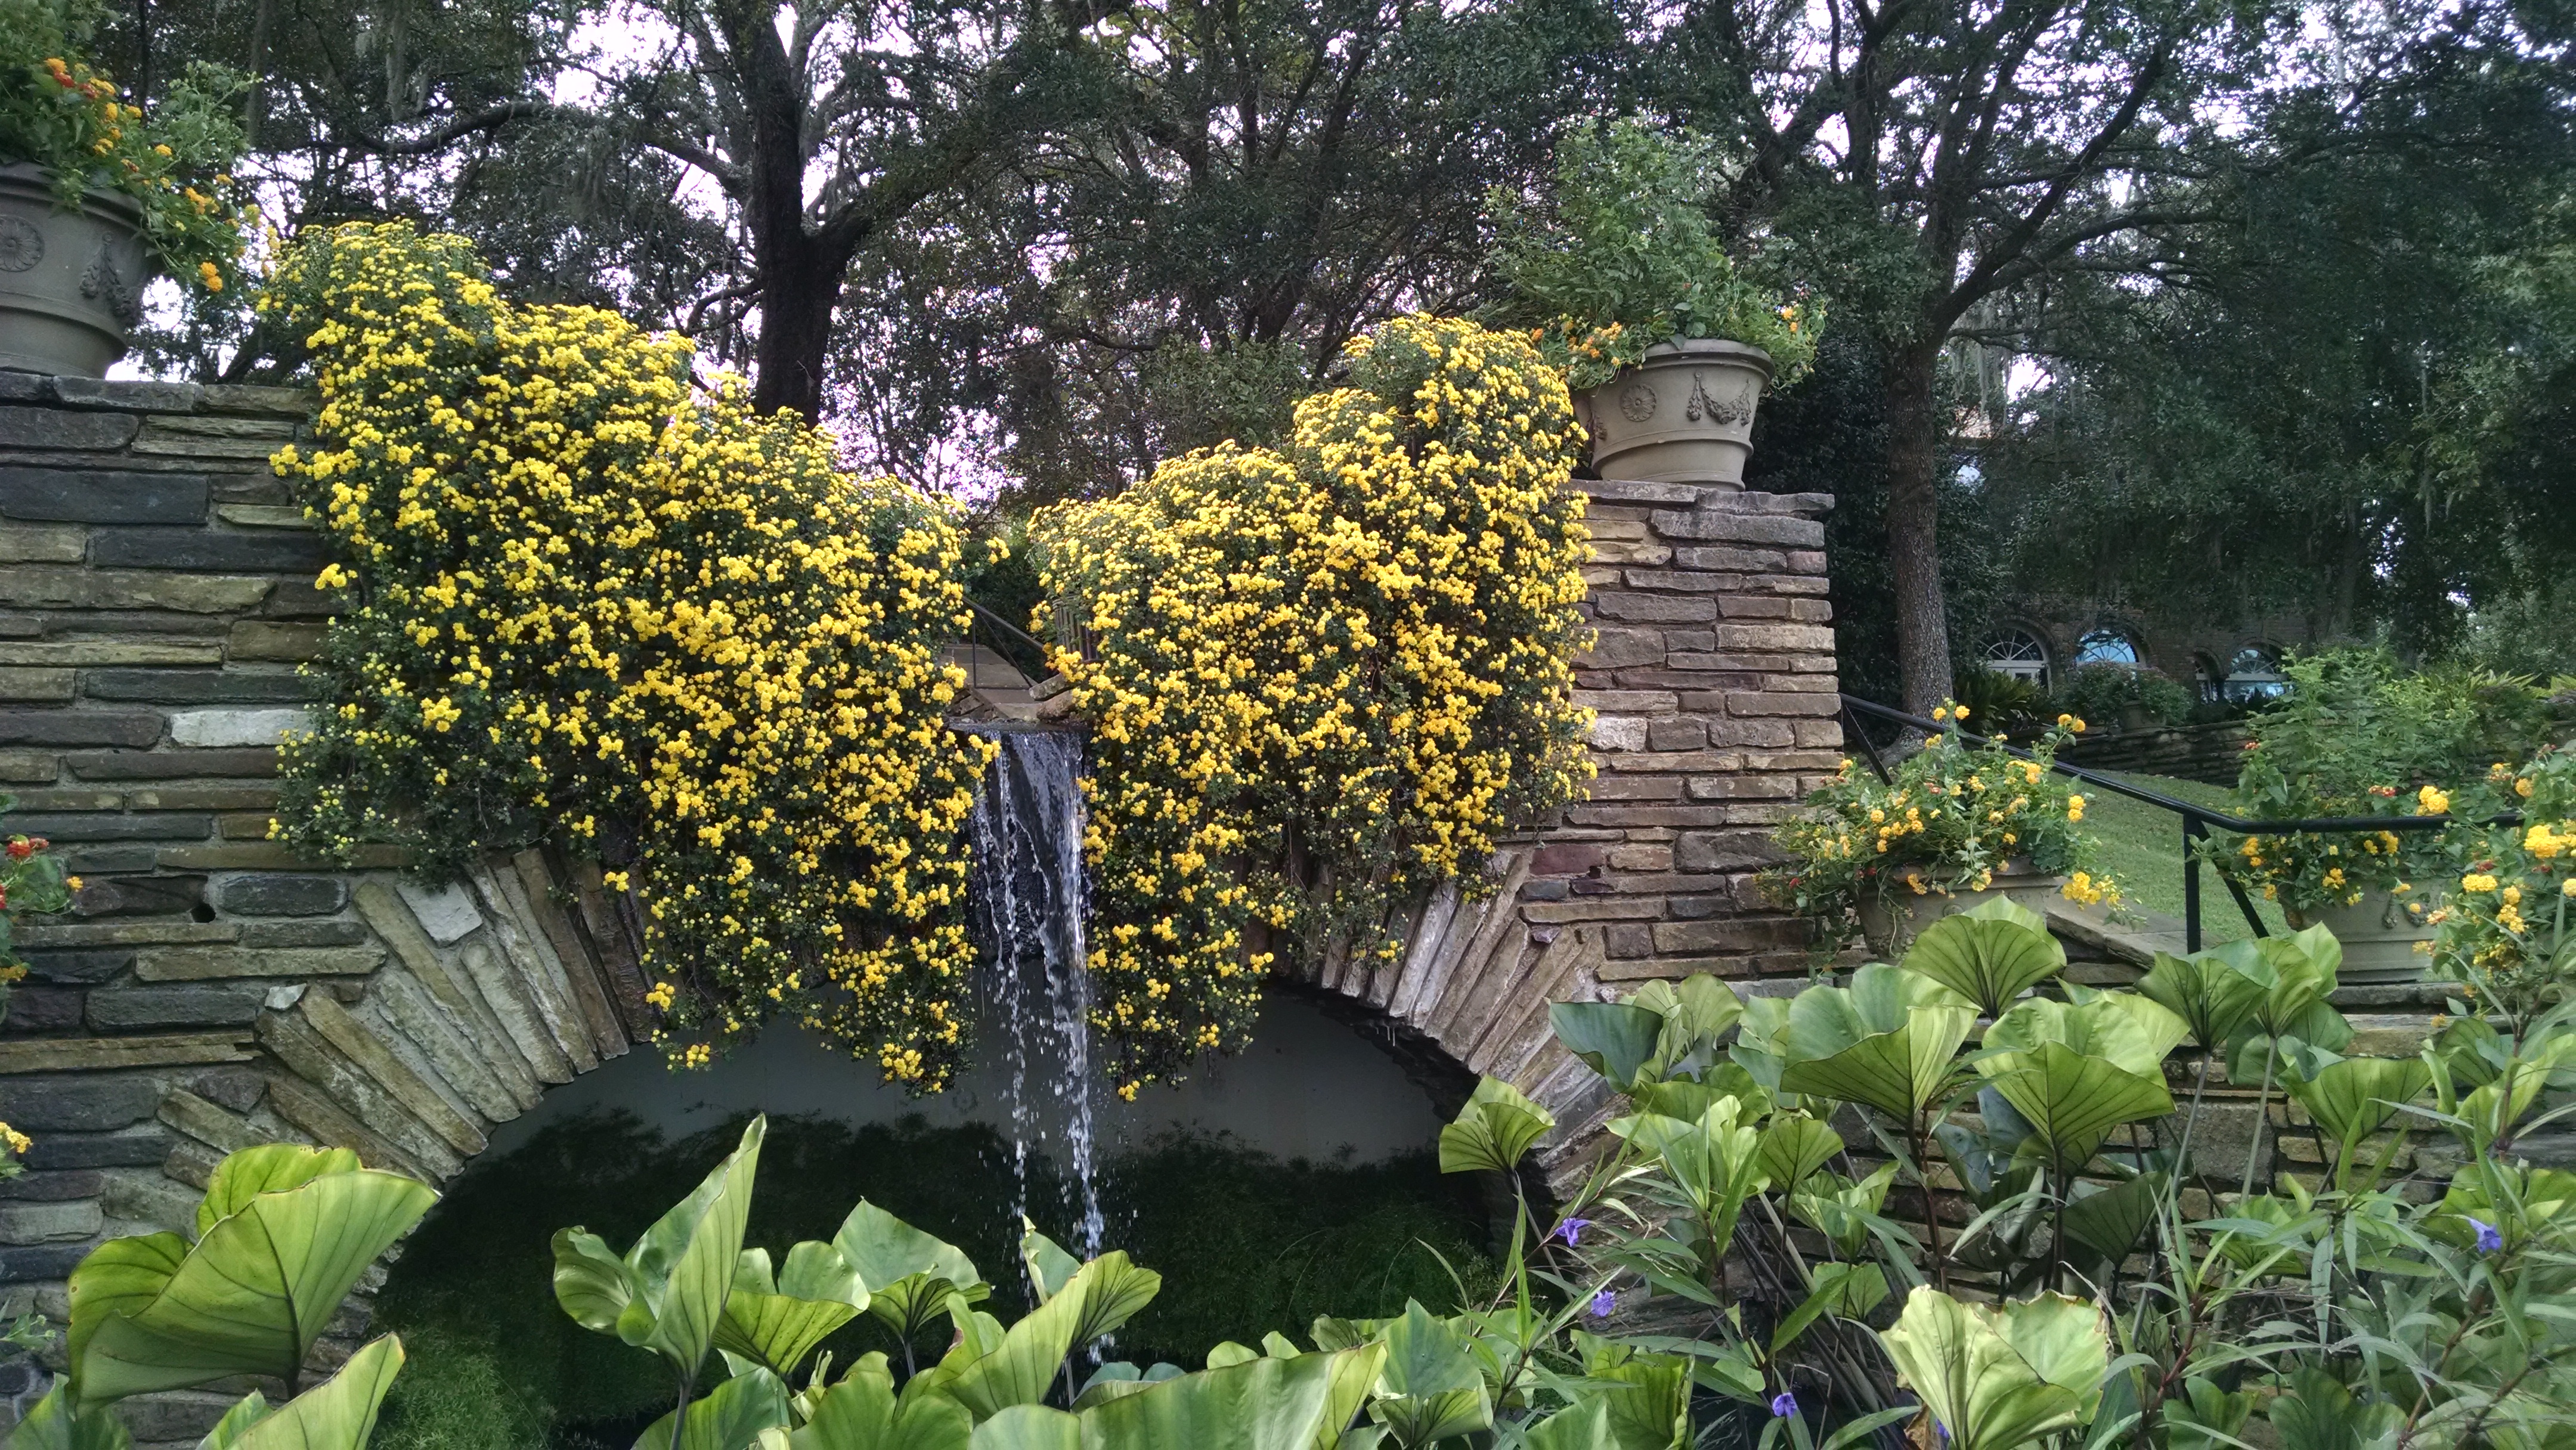 Fall events at Bellingrath Gardens and Home